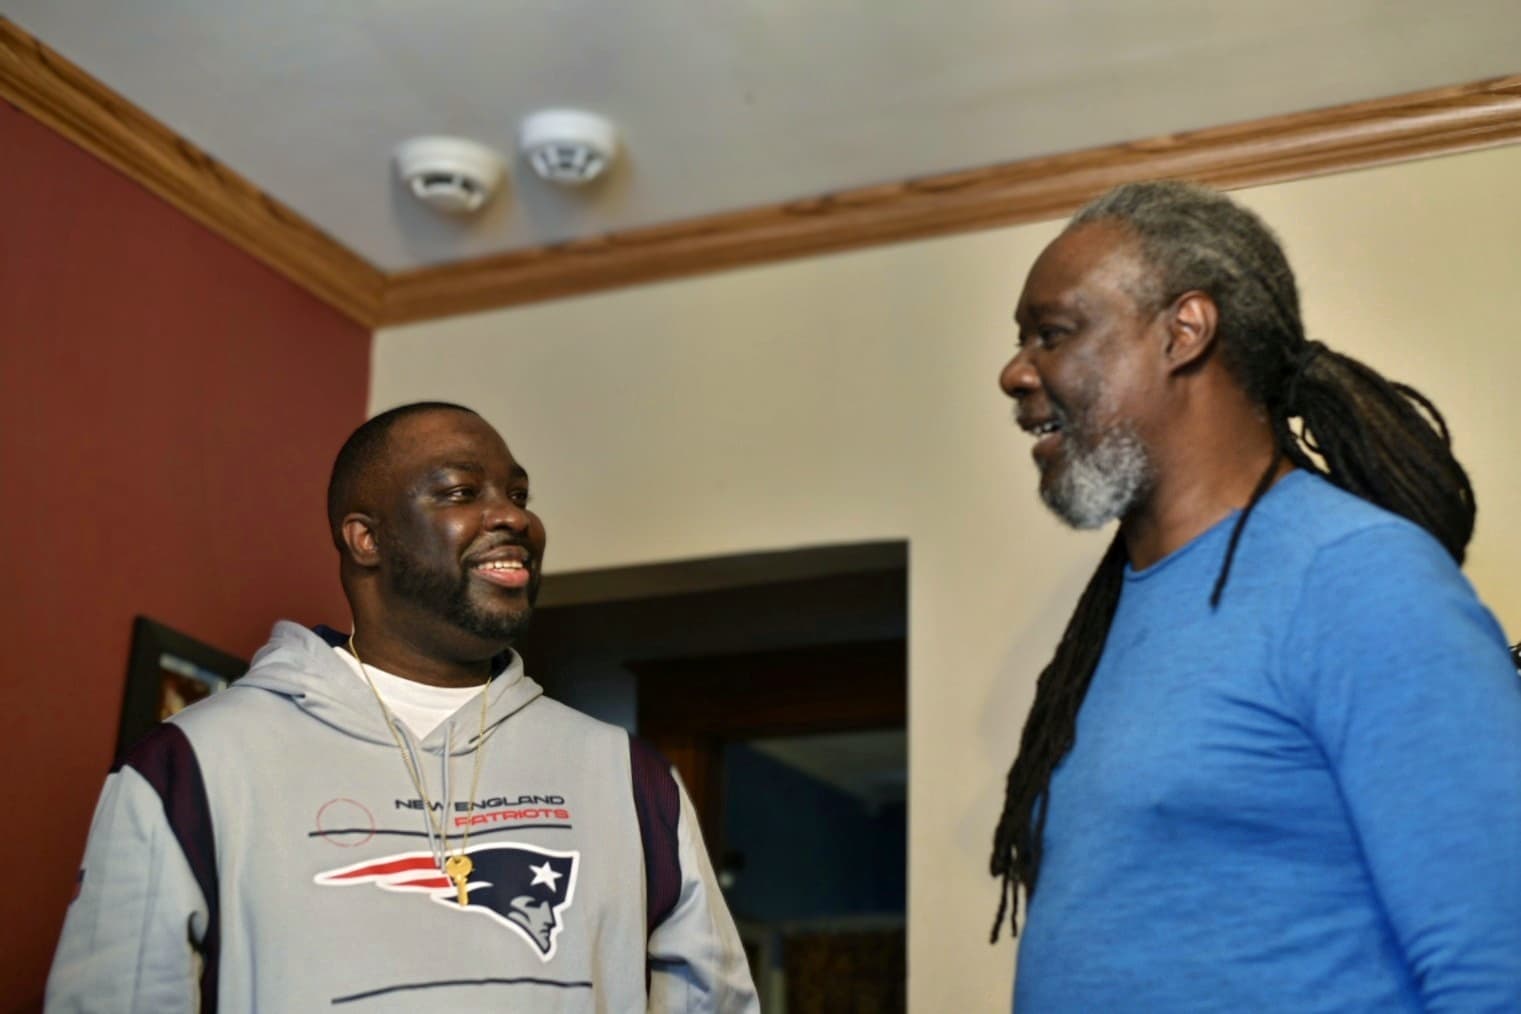 William Allen speaks with his father, Thurston Allen, hours after being released from prison (Courtesy photo Patty DeJuneas)